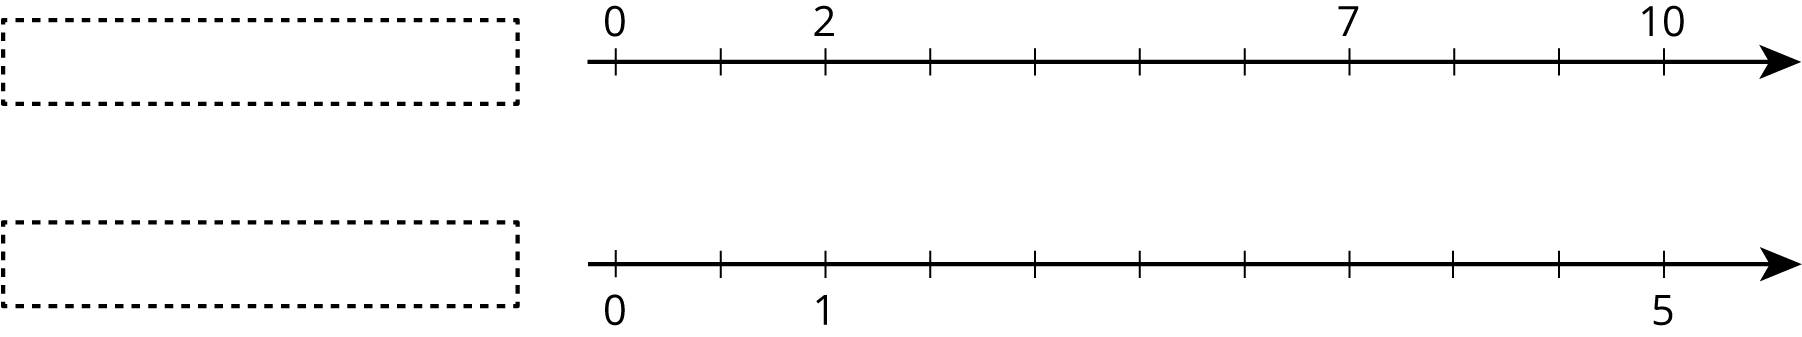 A double number line with 11 evenly spaced tick marks. For the top number line, a dashed box represents the title and the number 0 is on the first tick mark, 2 on the third, 7 on the eighth, and 10 on the eleventh. For the bottom number line, a dashed box represents the title and the number 0 is on the first tick mark, 1 on the third, and 5 on the eleventh.